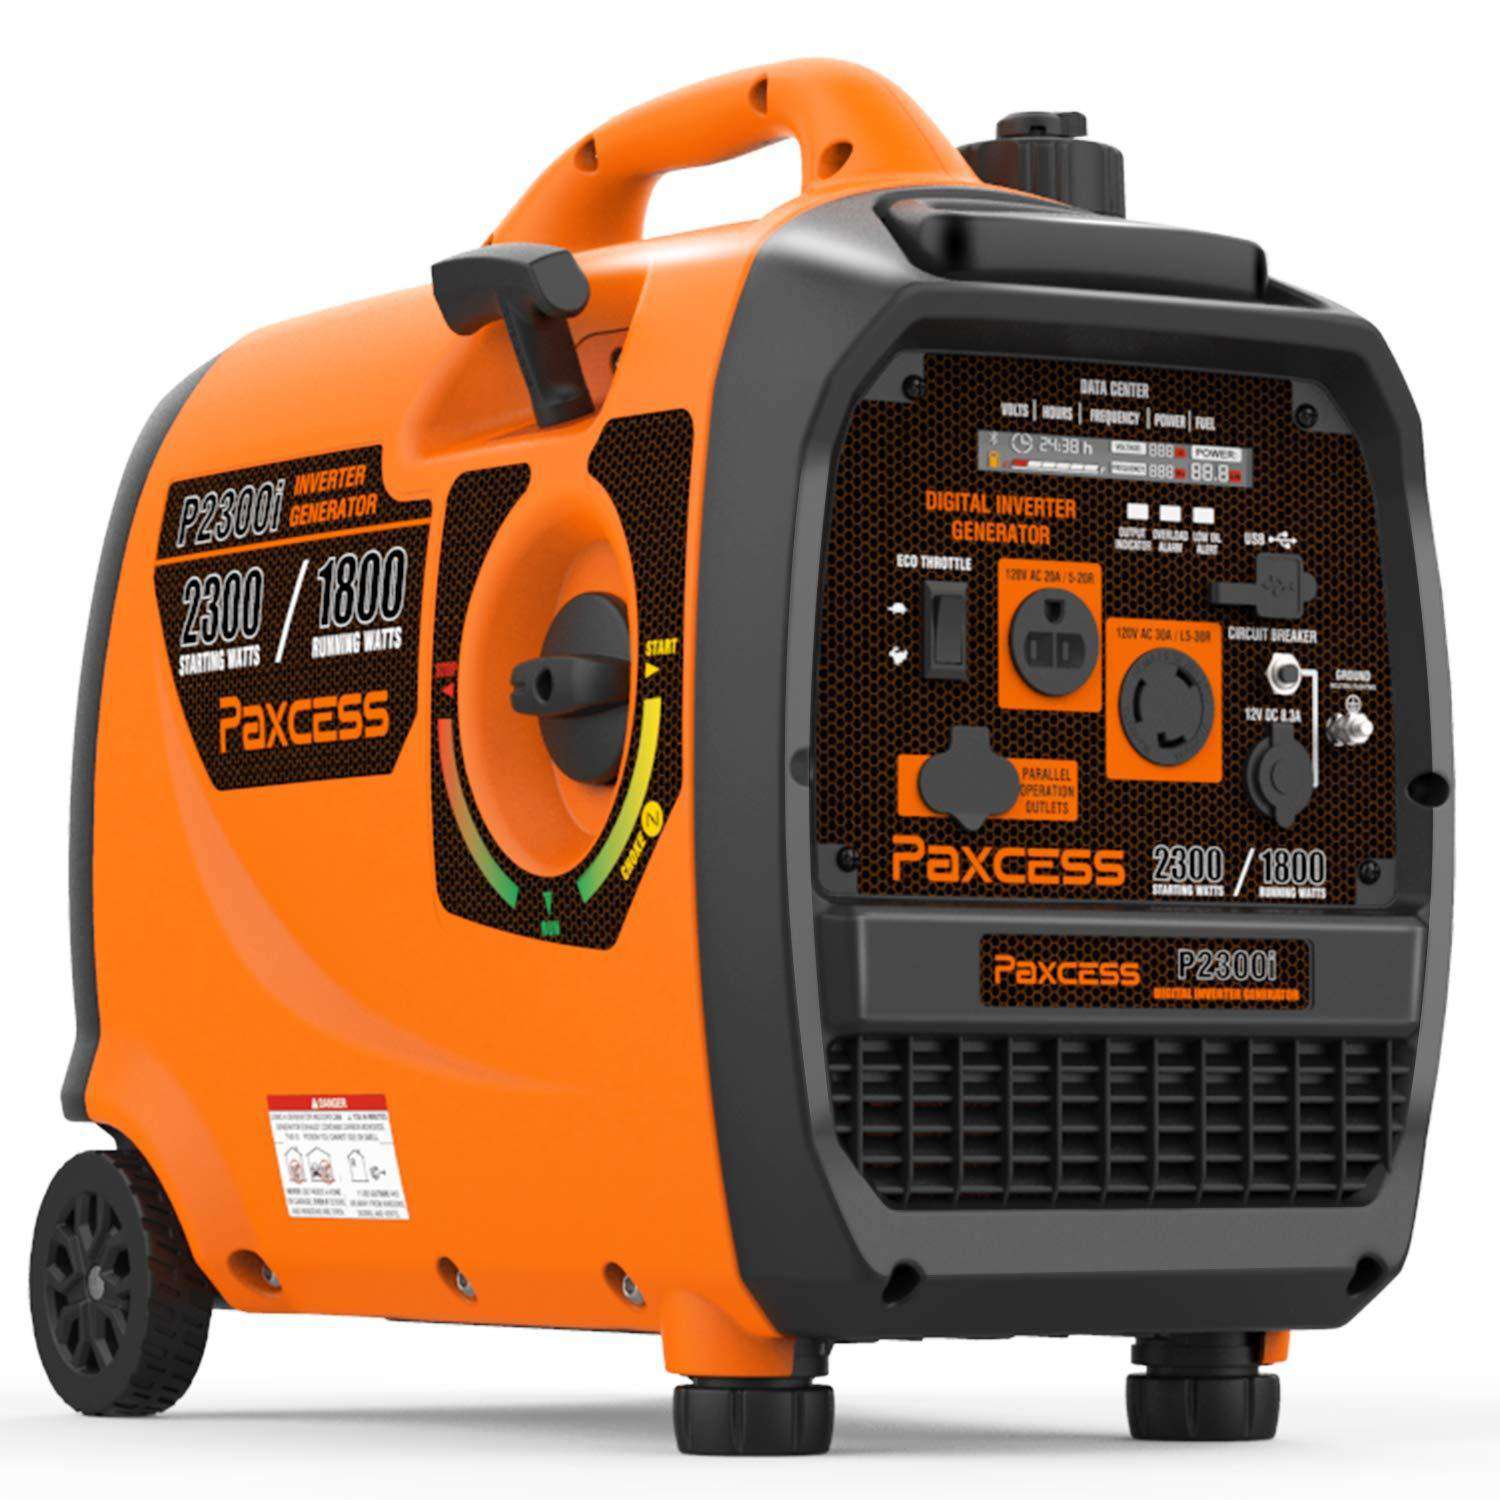 Paxcess, Paxcess P2300i 1800W/2300W Super Quiet Portable Gas Inverter Generator with Wheels and Handle New